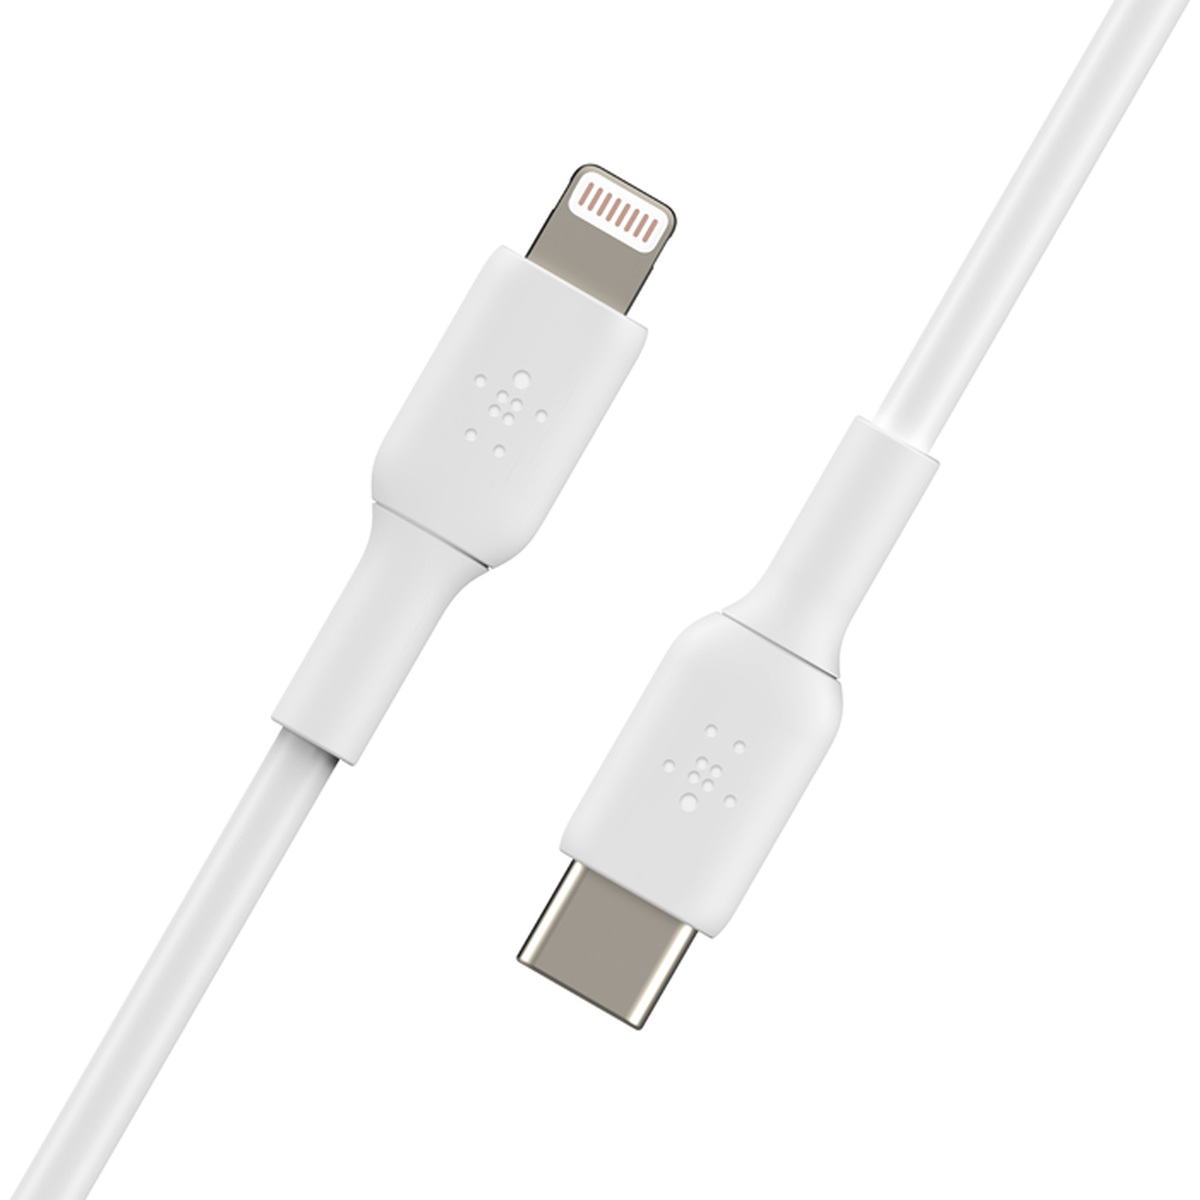 Cable USB A – micro USB/Lightning, iphone y ipad (1 m) – Dohe